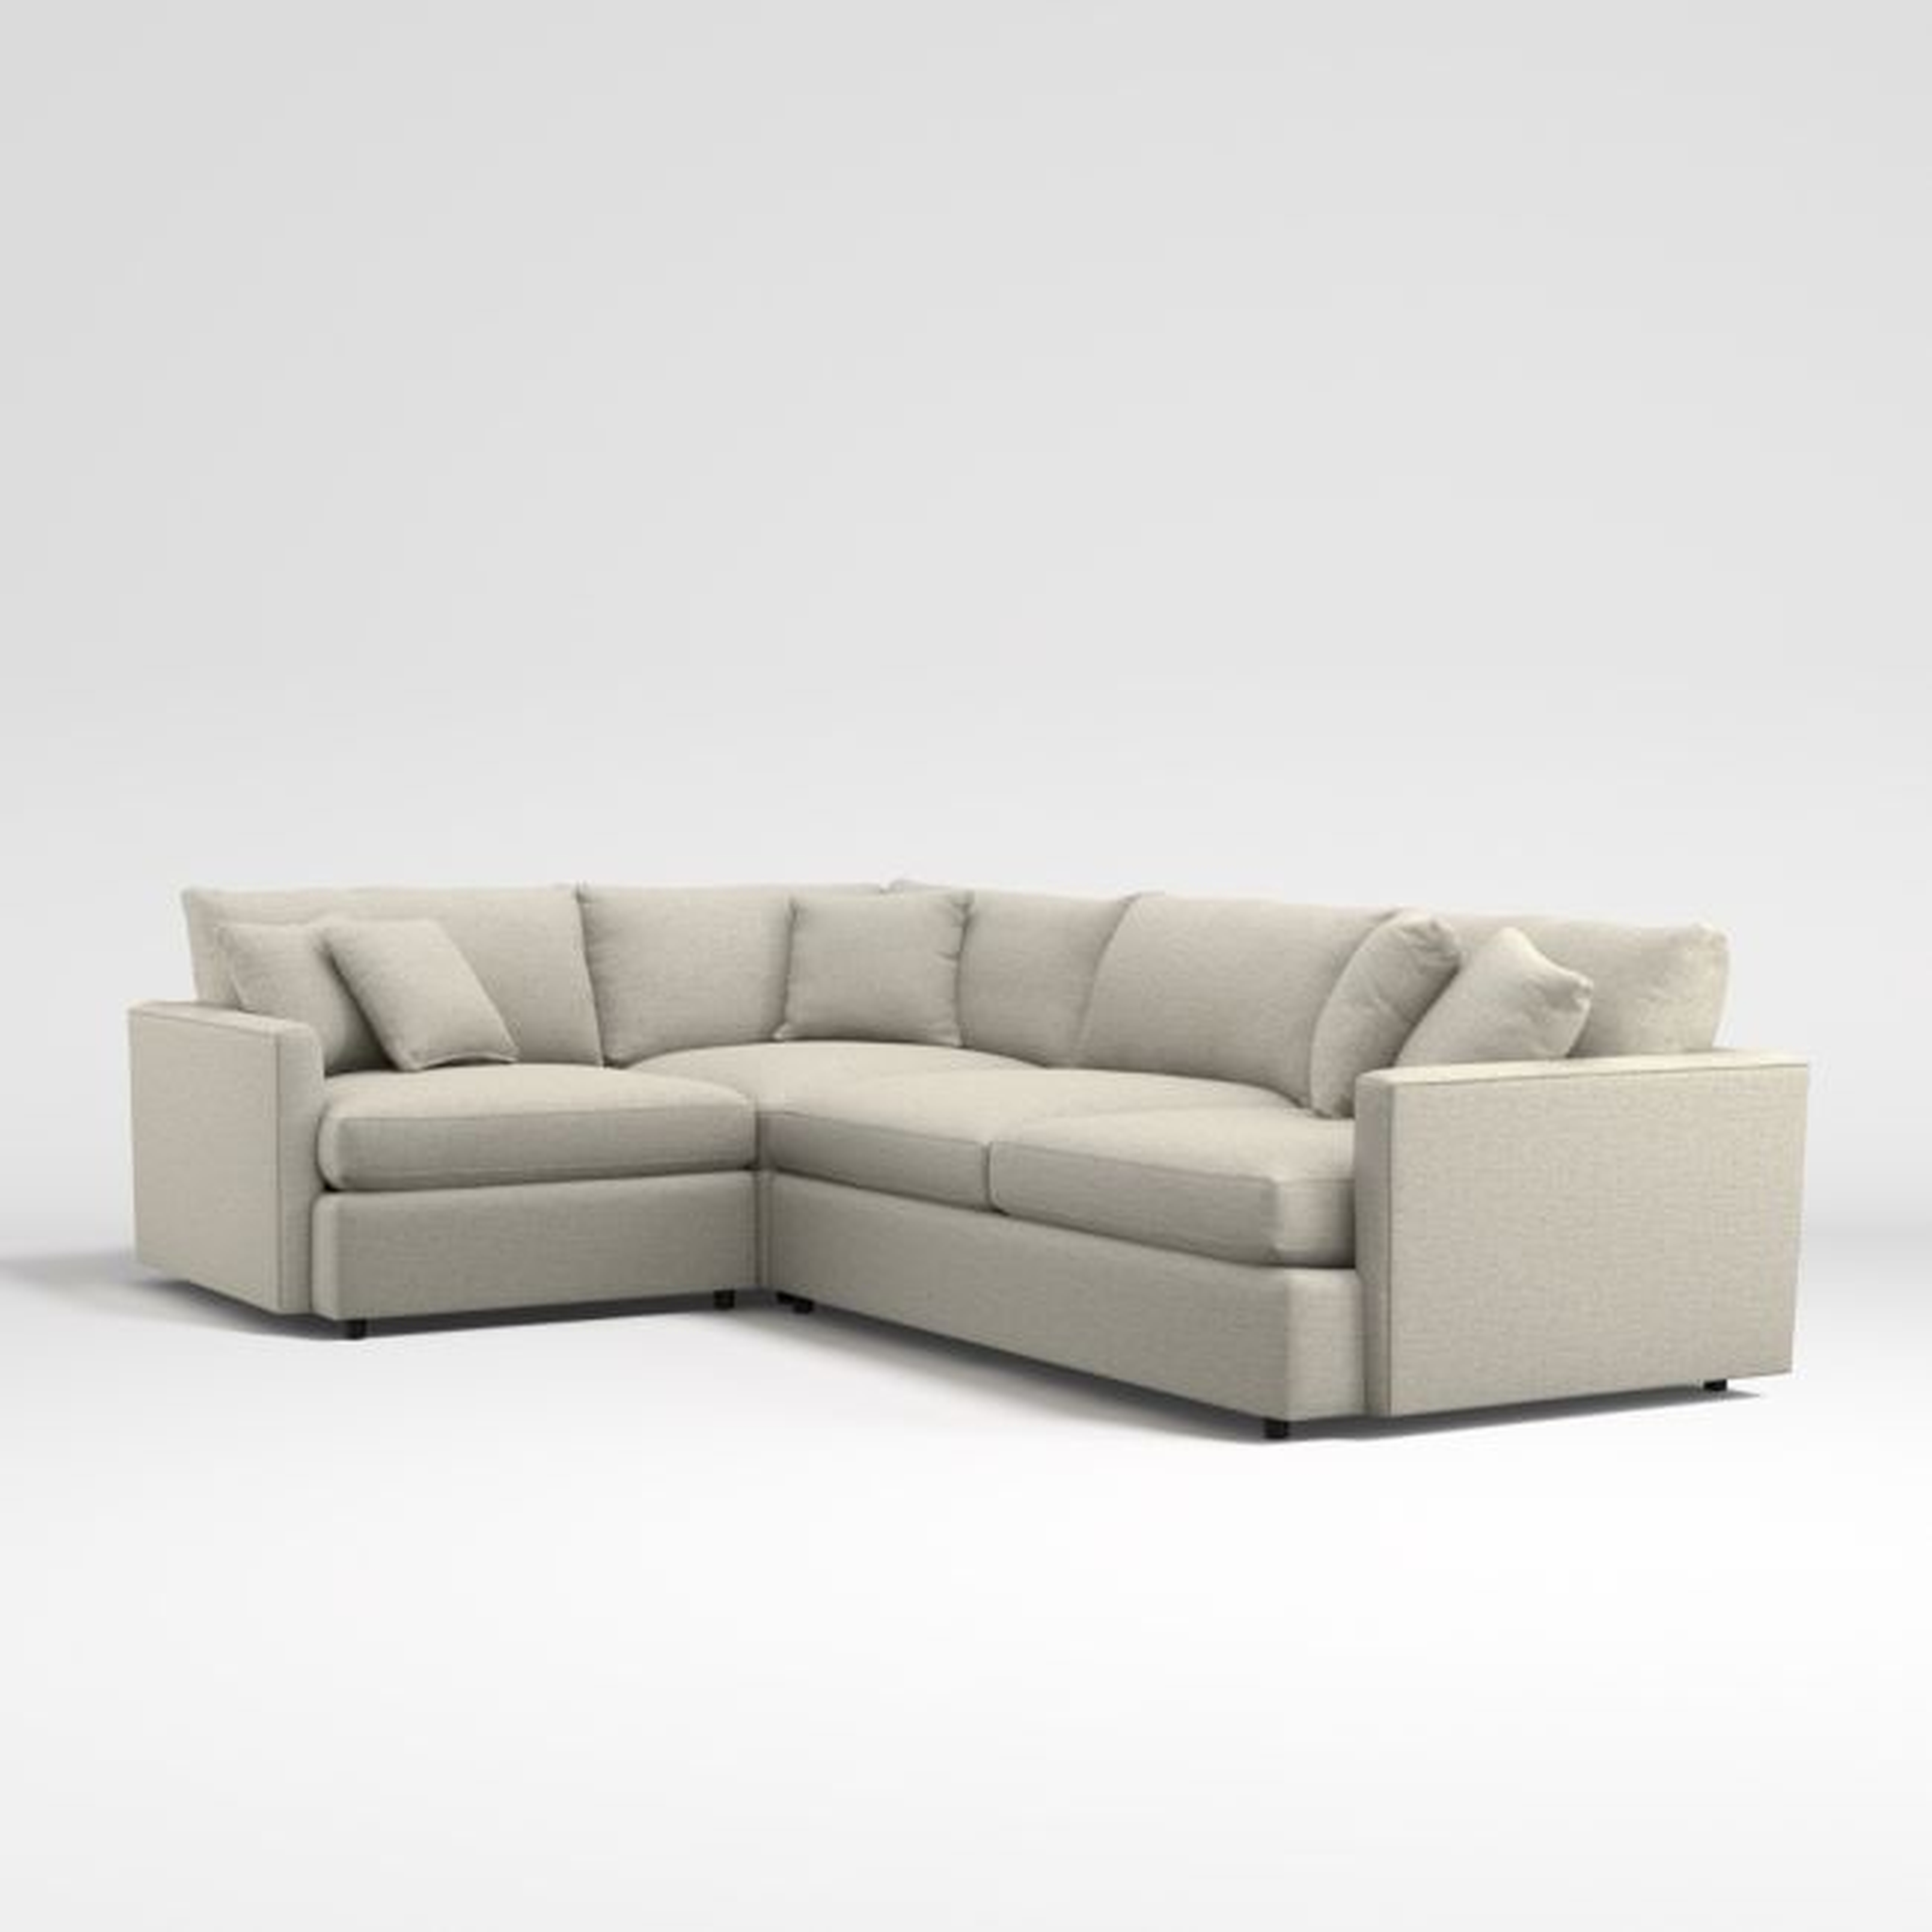 Lounge 3-Piece Sectional - Crate and Barrel